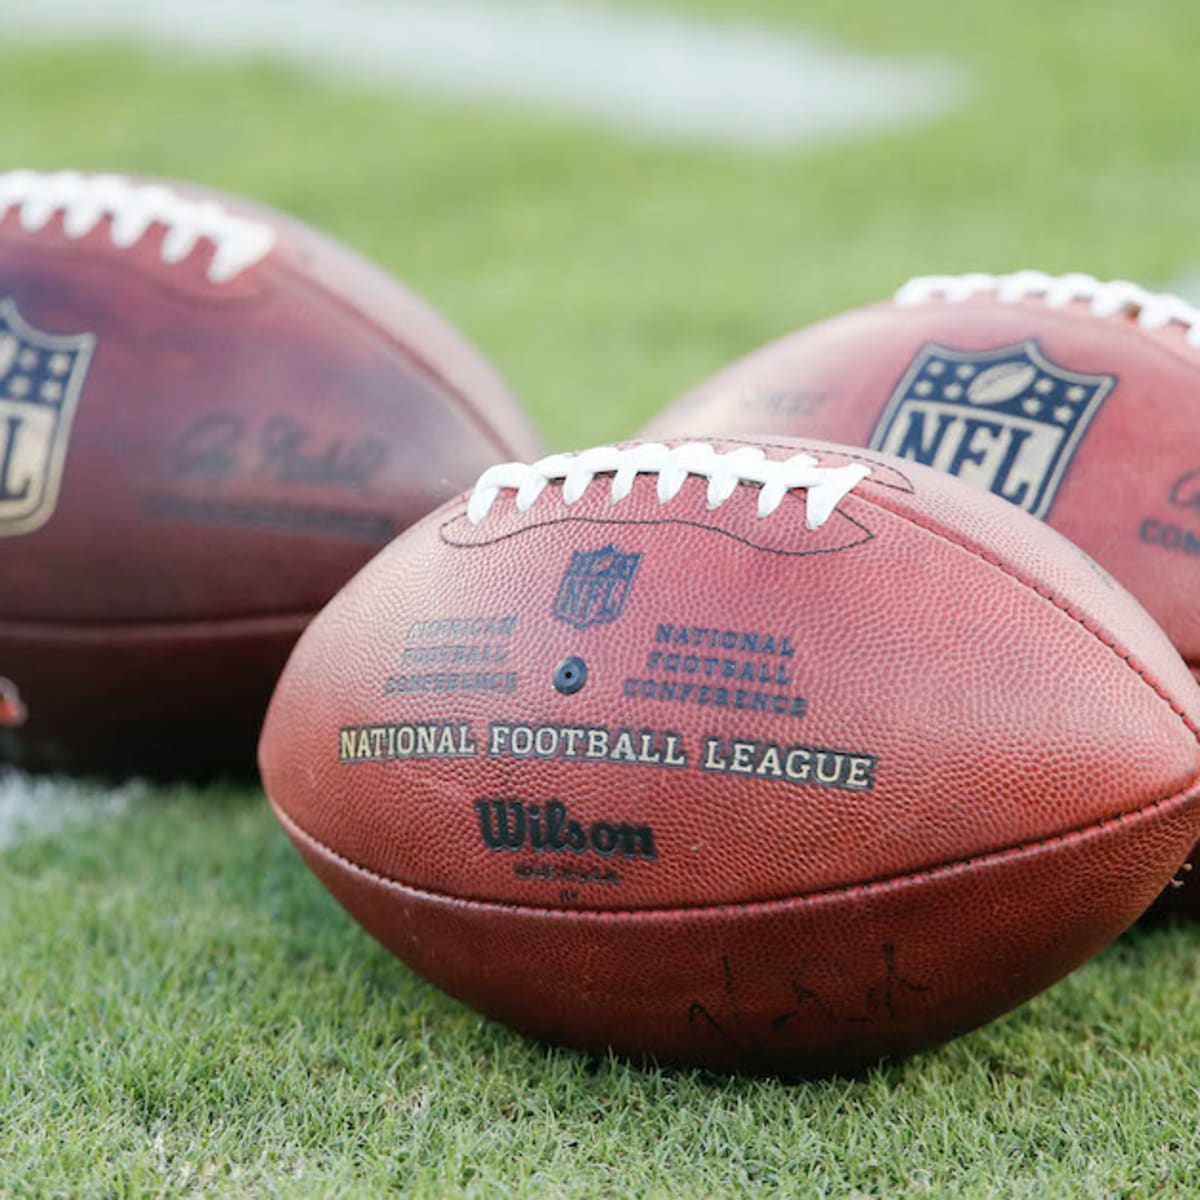 different american football leagues